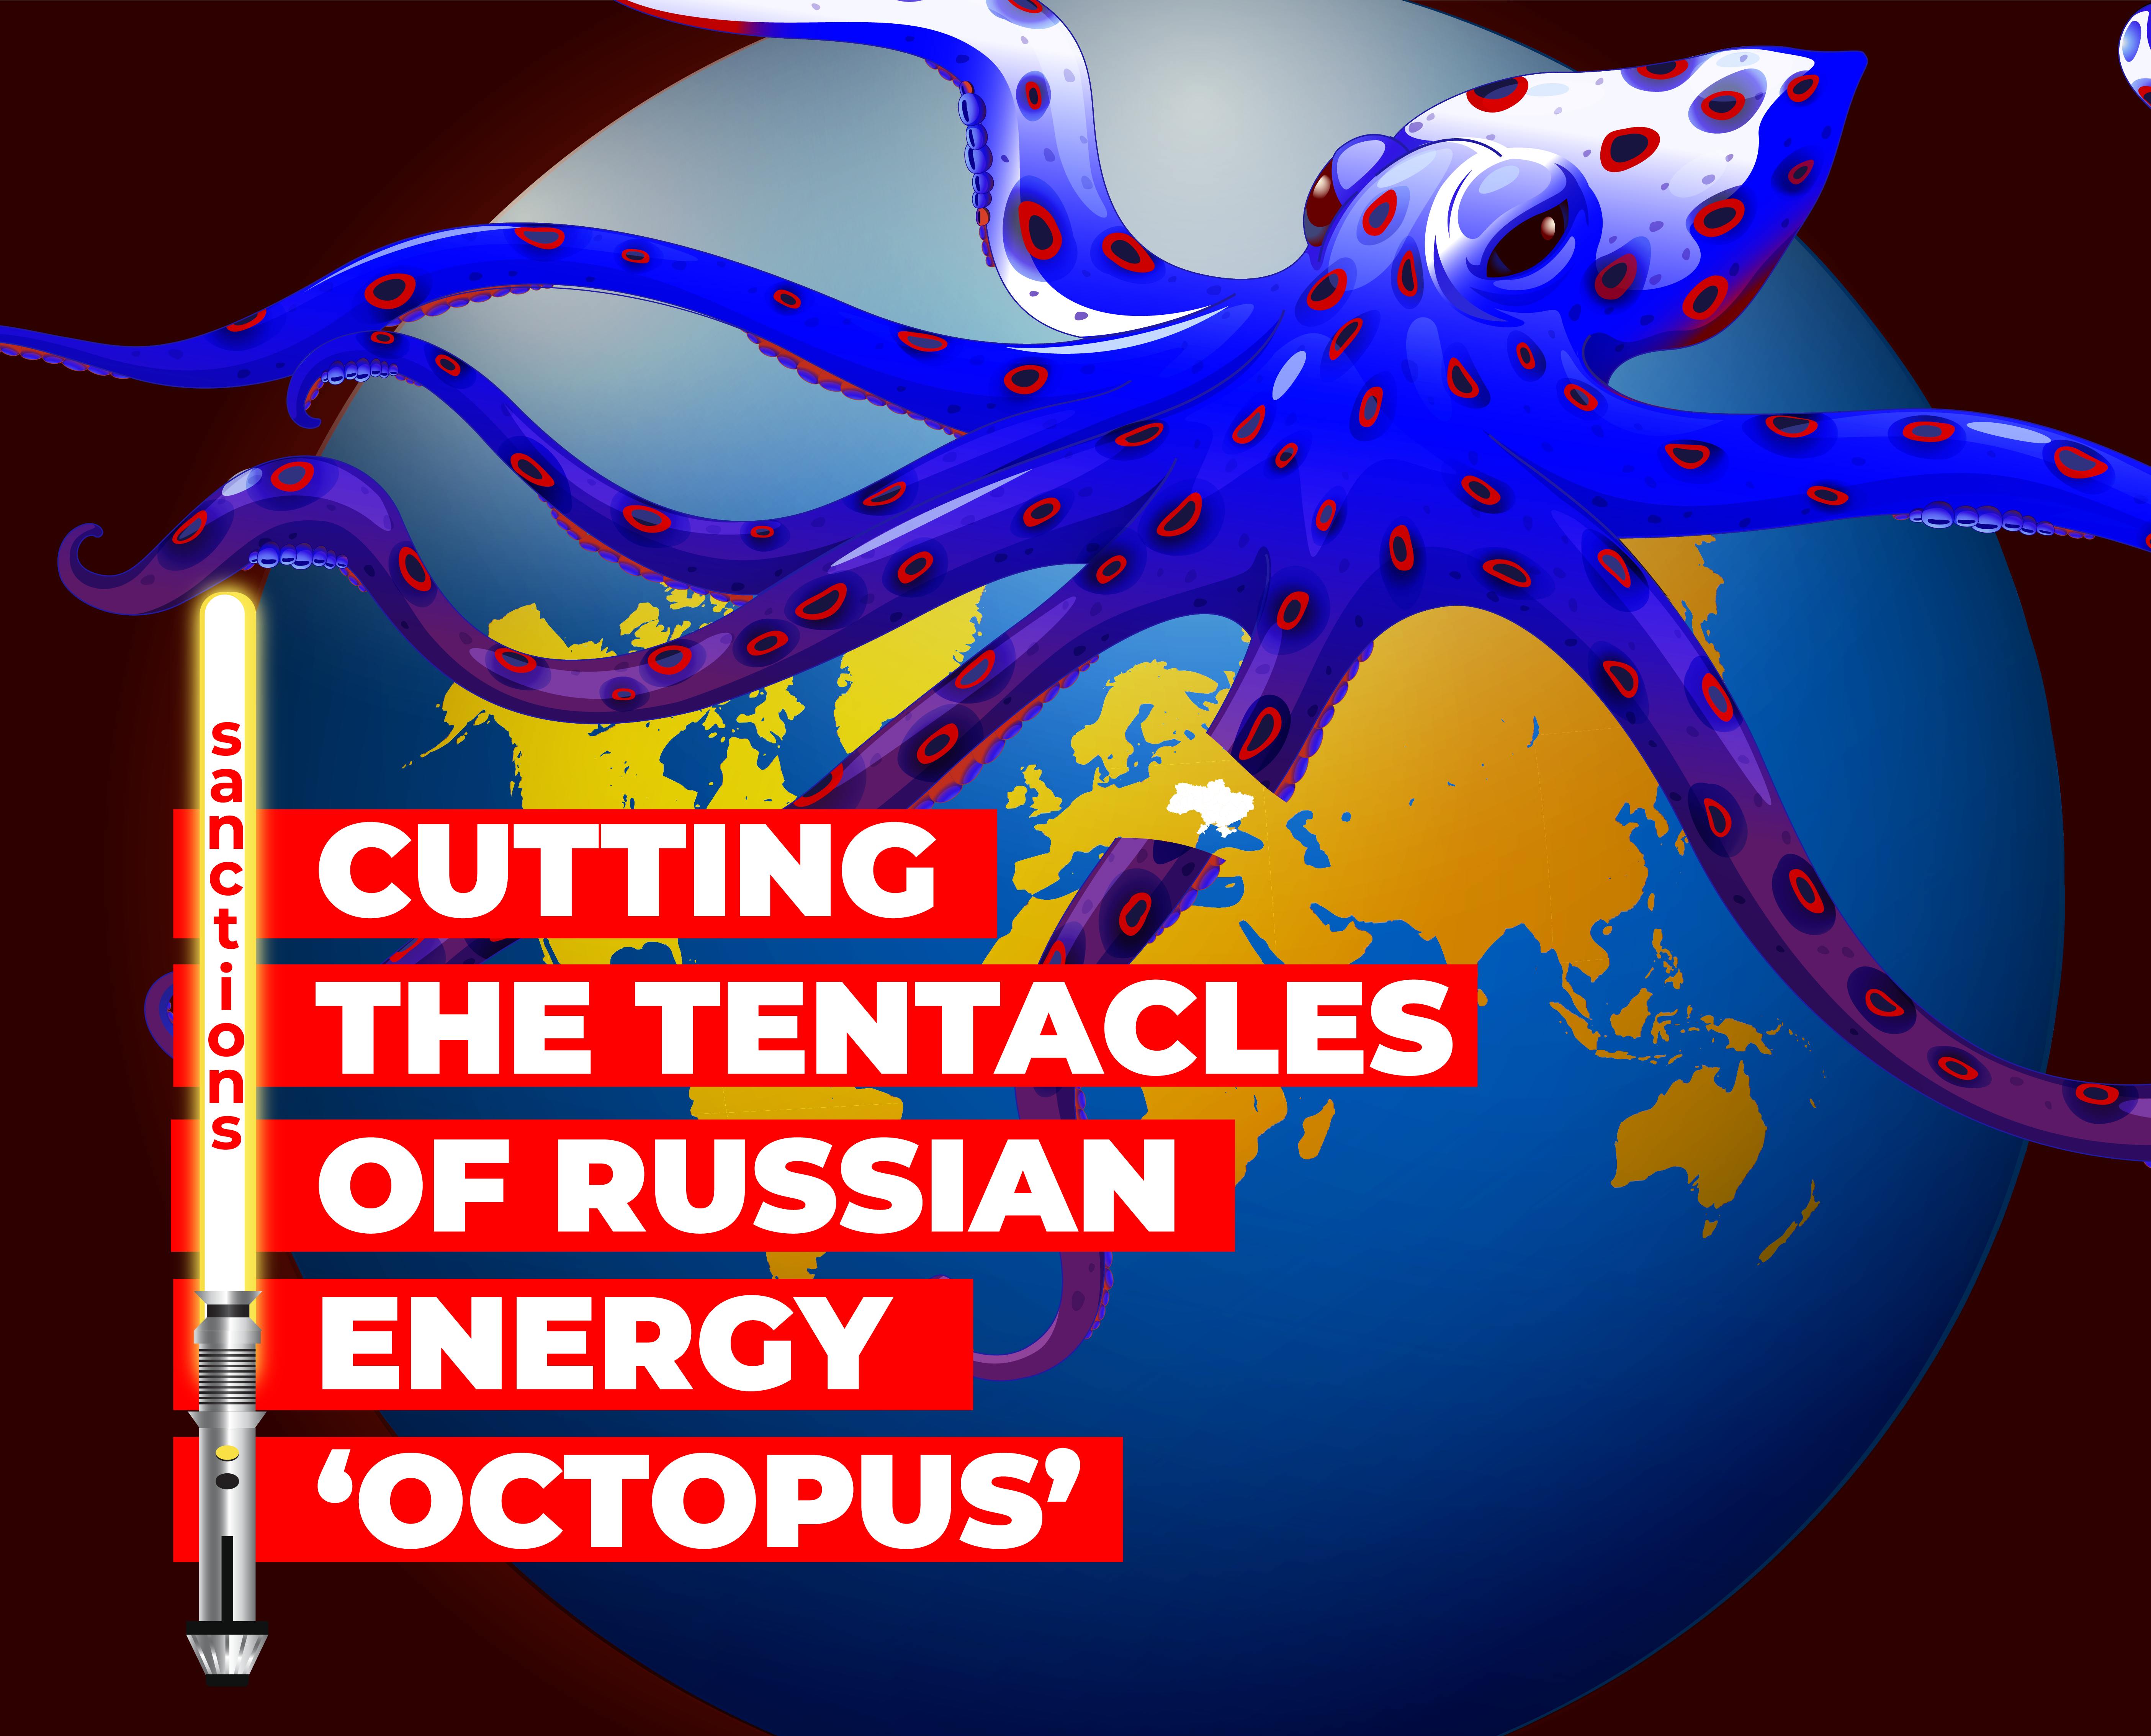 Inter RAO: how to cut off the tentacles of the Russian energy octopus